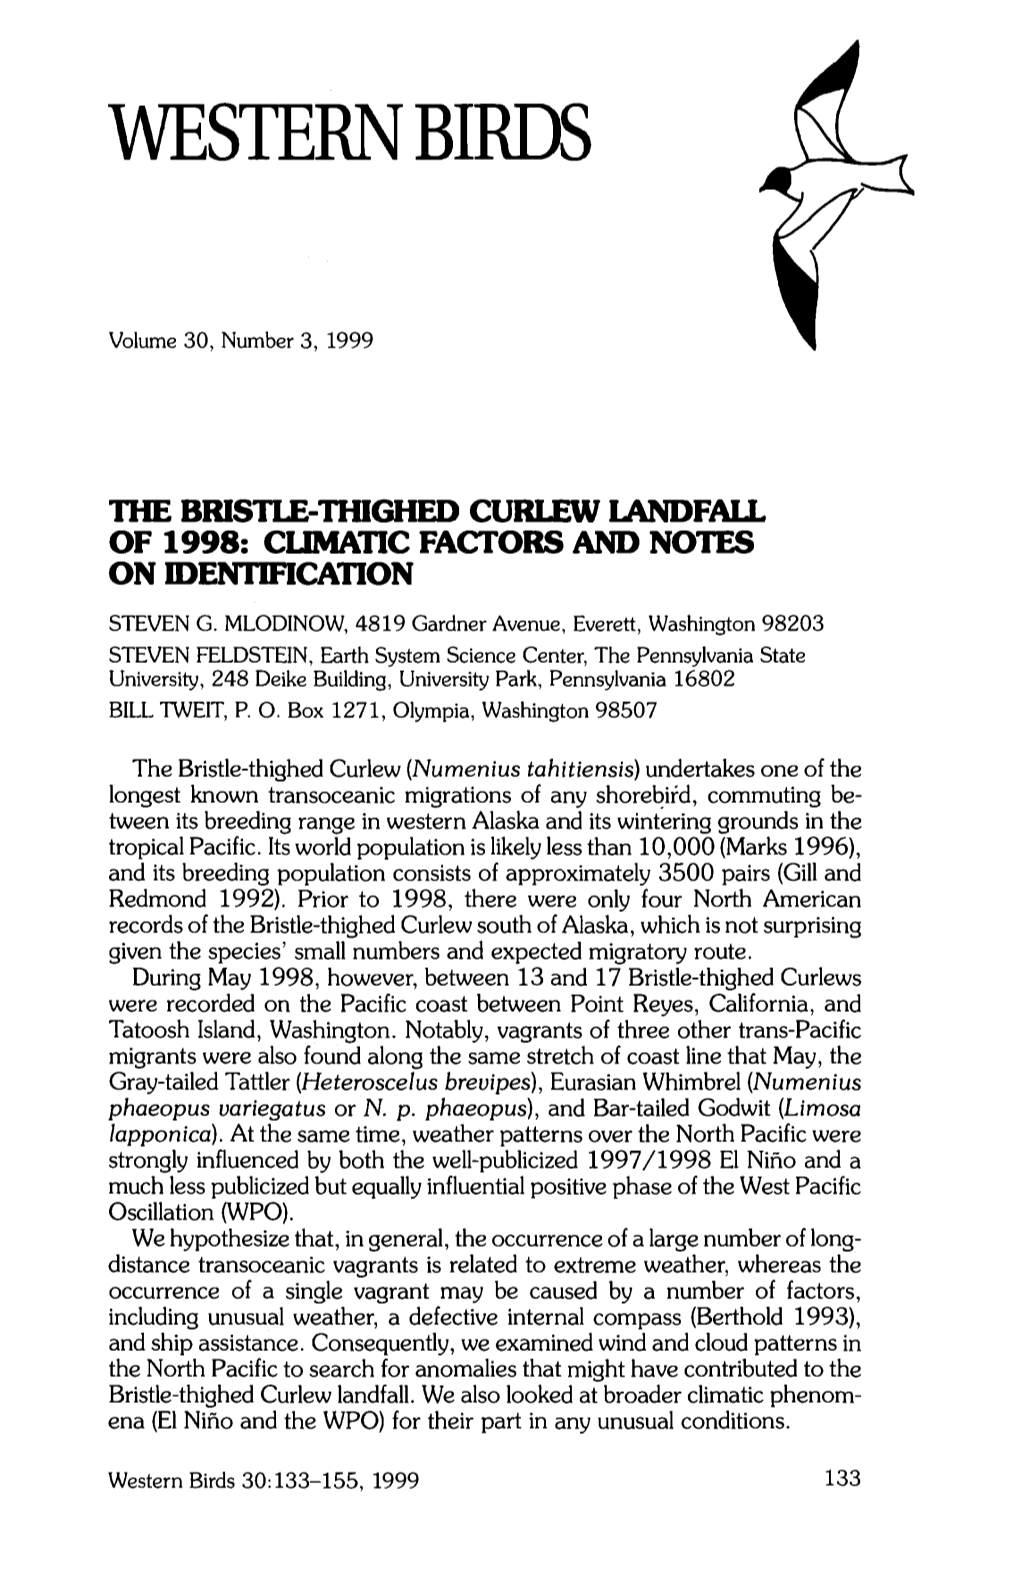 The Bristle-Thighed Curlew Landfall of 1998